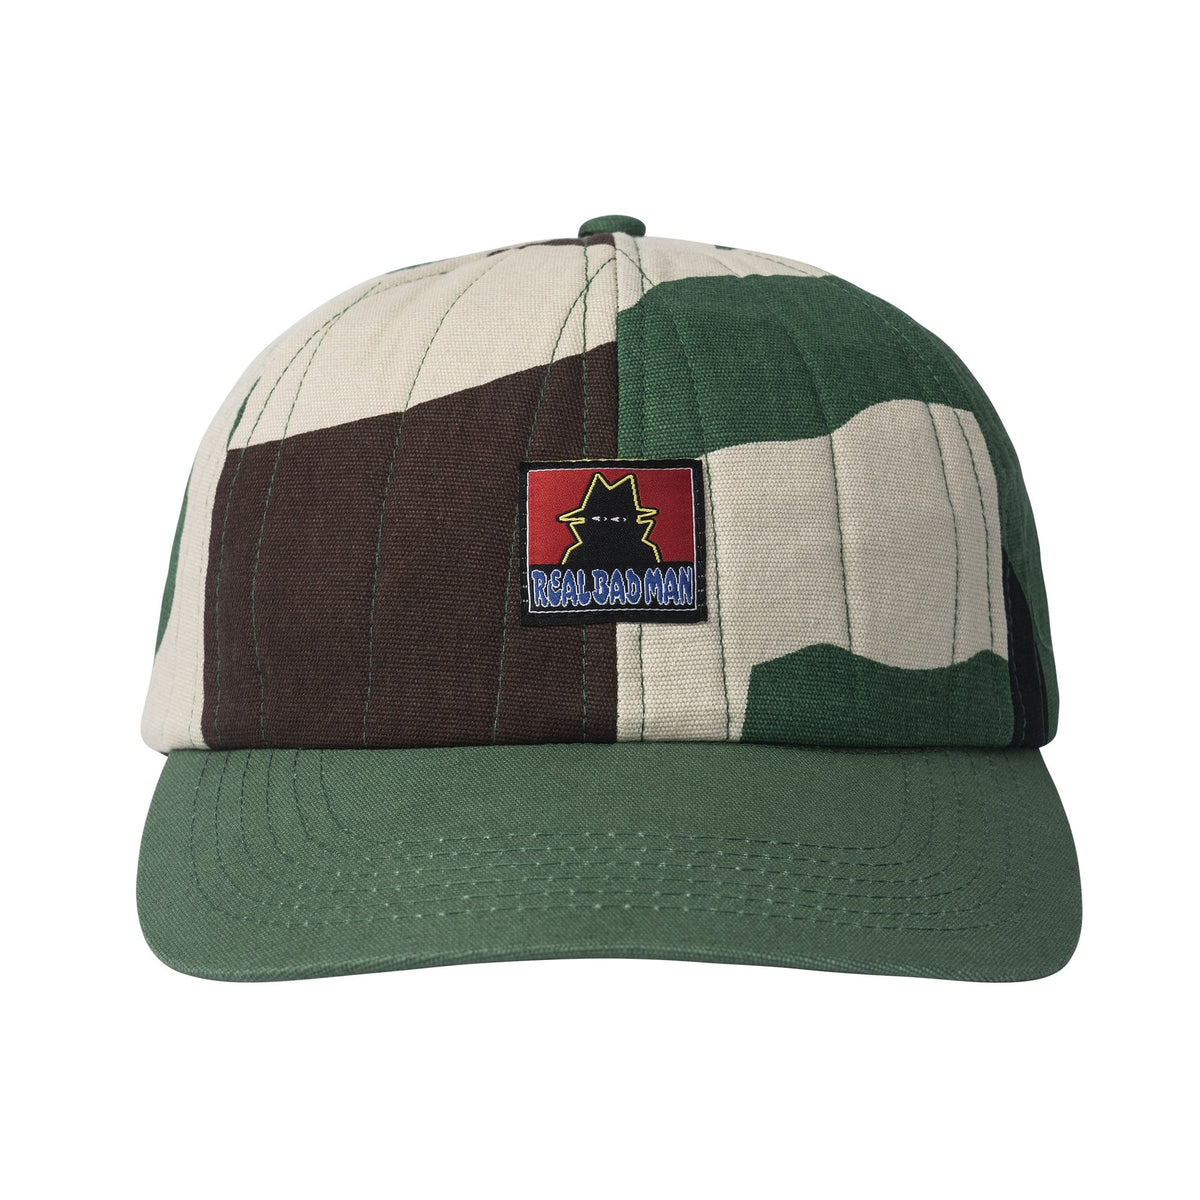 REAL BAD MAN QUILTED 6 PANEL